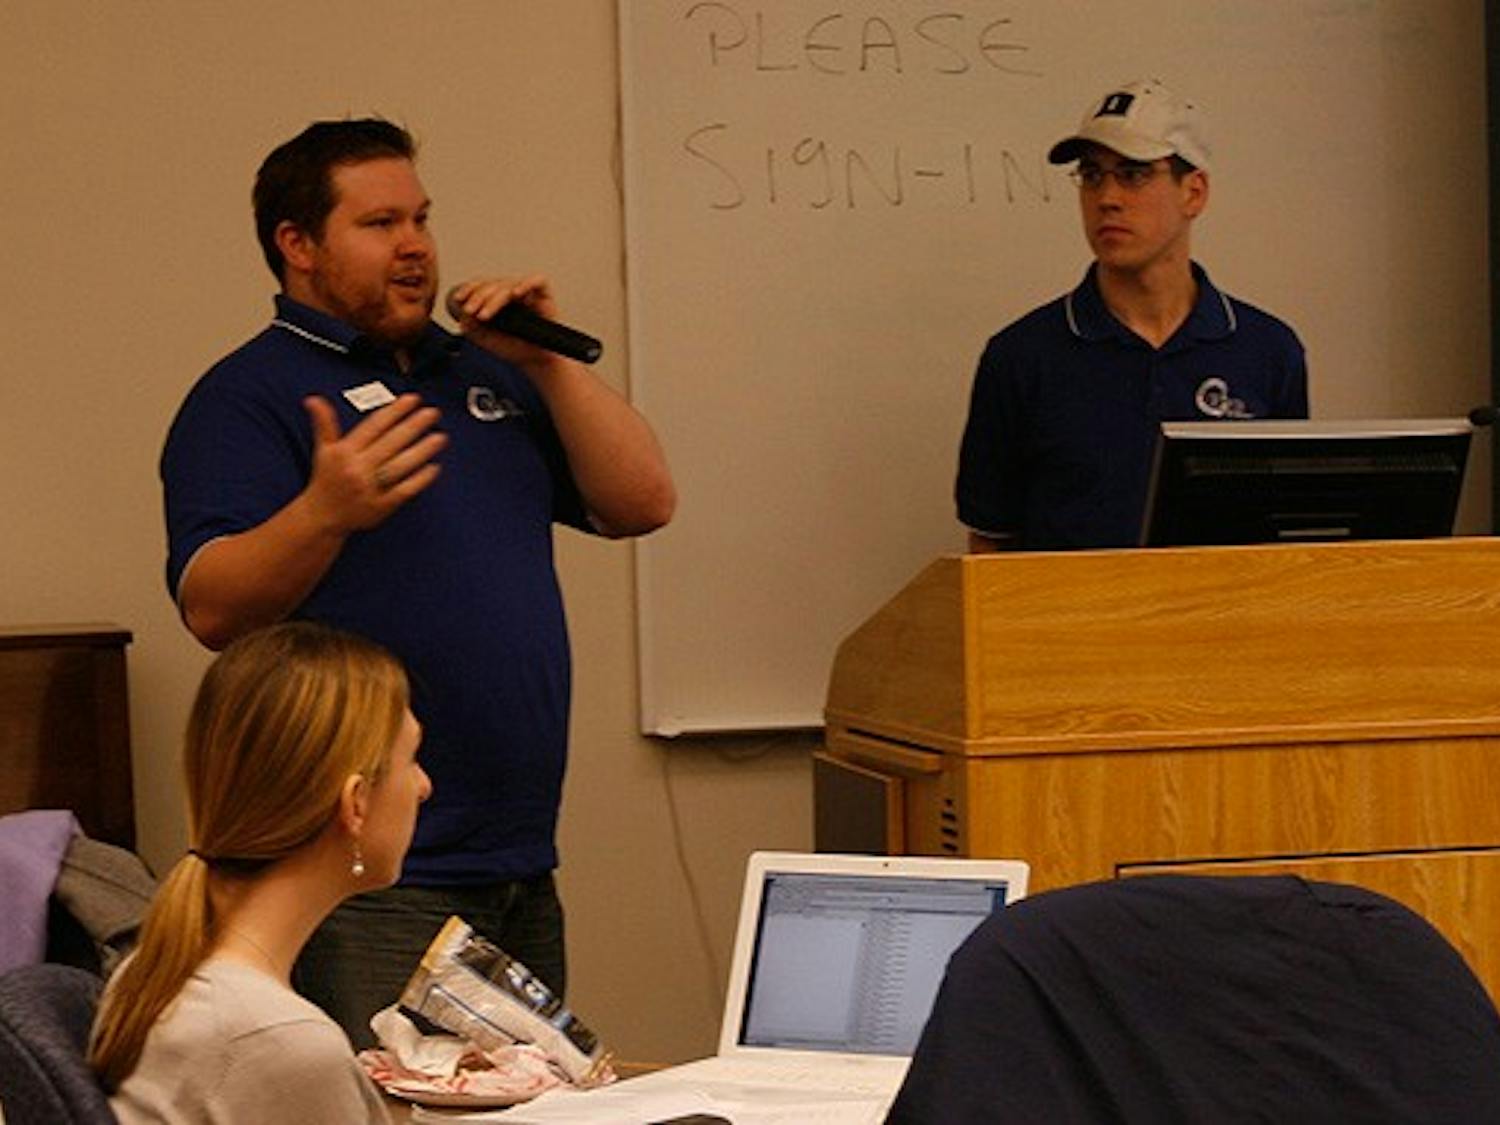 At the Graduate and Professional Student Council’s meeting Tuesday night, members discussed and passed an amendment to prevent student groups from affiliating with both GPSC and OSAF.